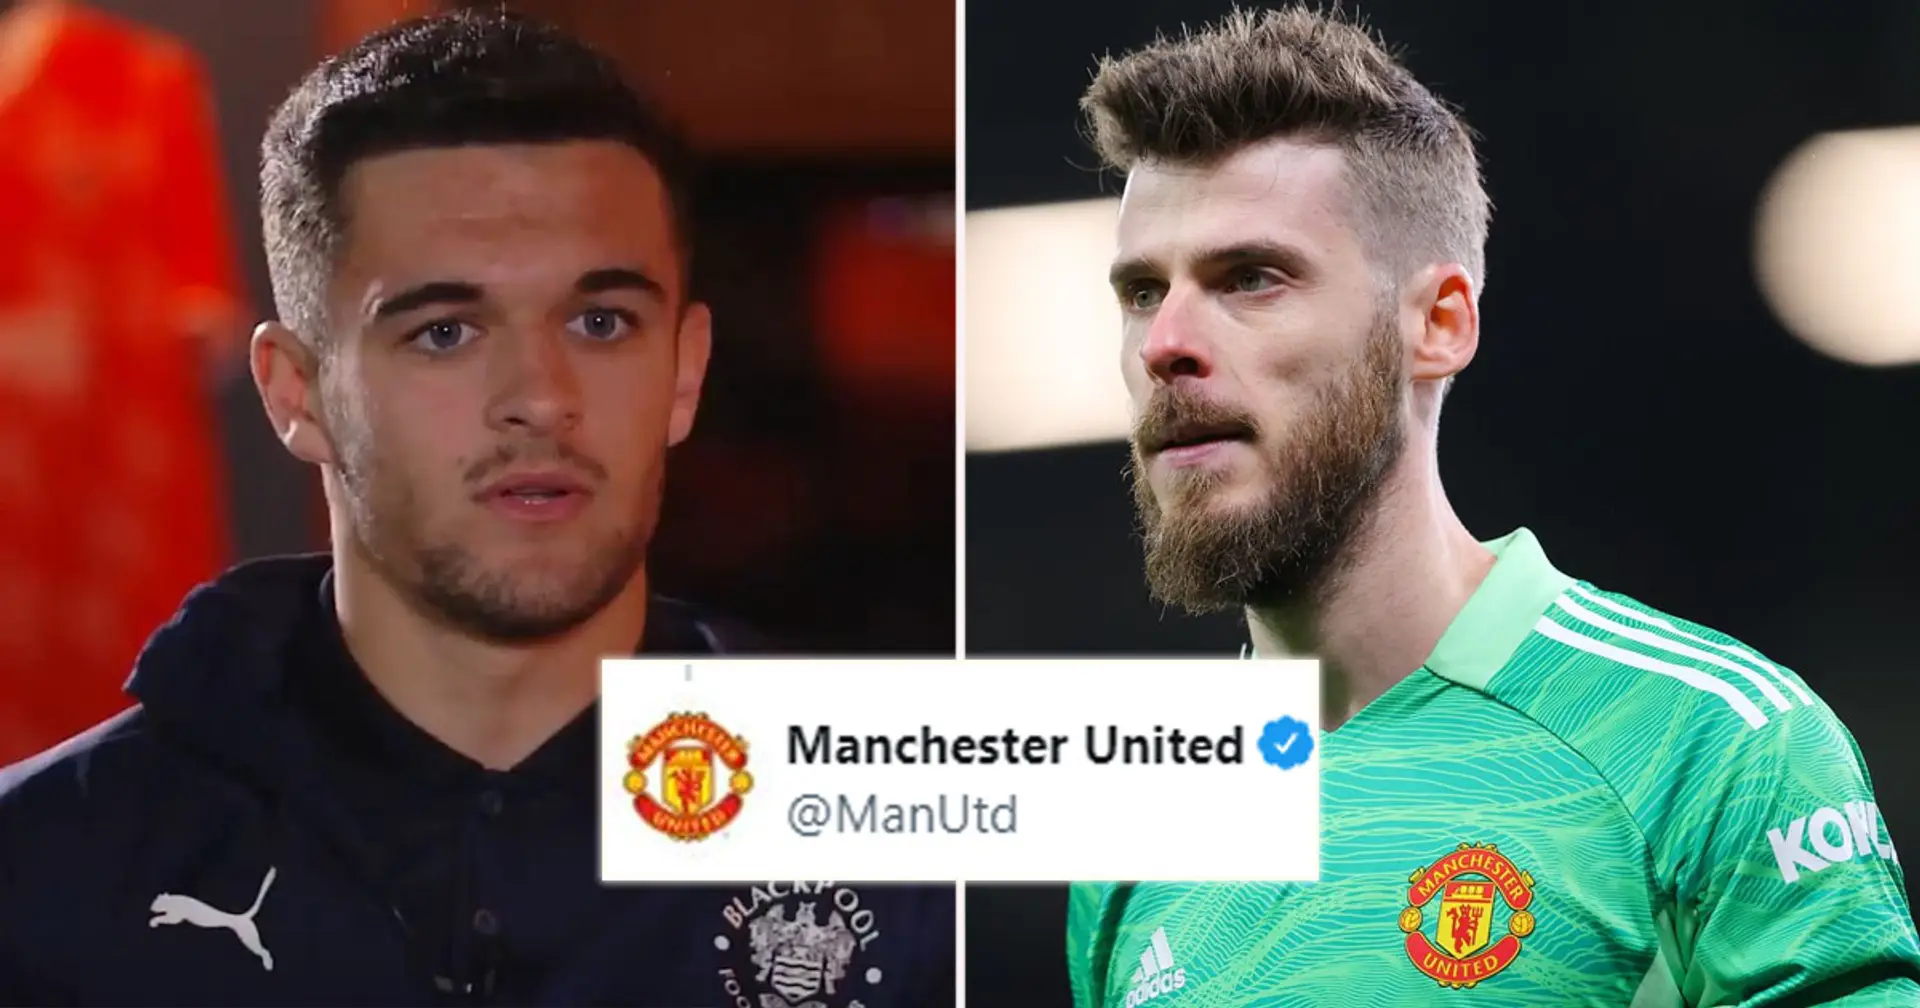 De Gea and Man United send messages to UK's first openly gay male footballer Jake Daniels